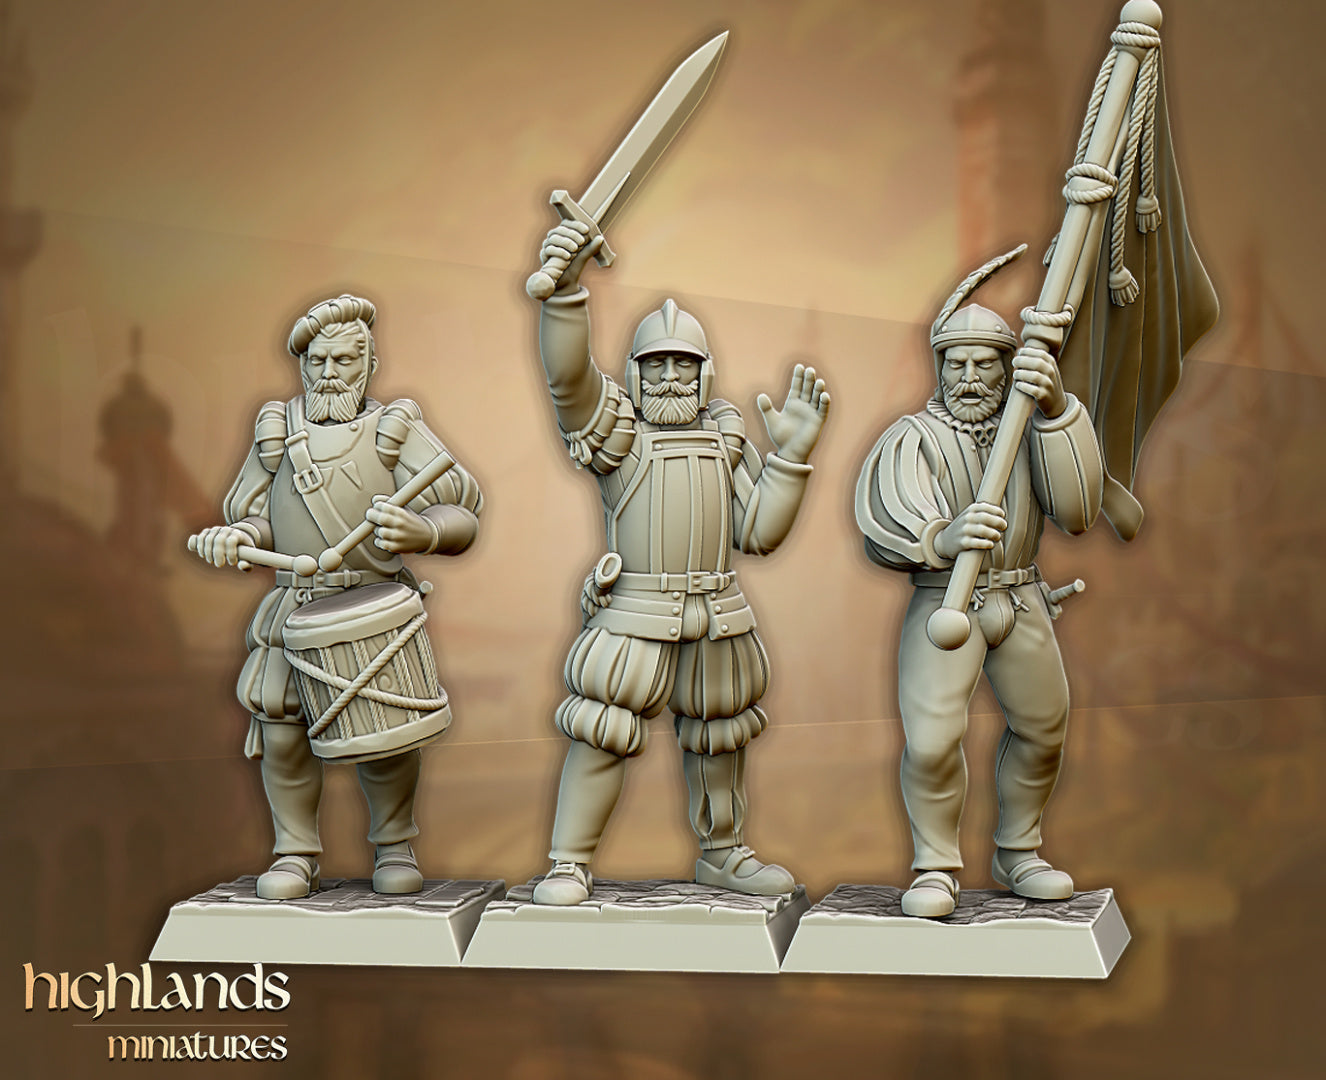 Sunland Imperial Troops with Swords by Highlands Miniatures